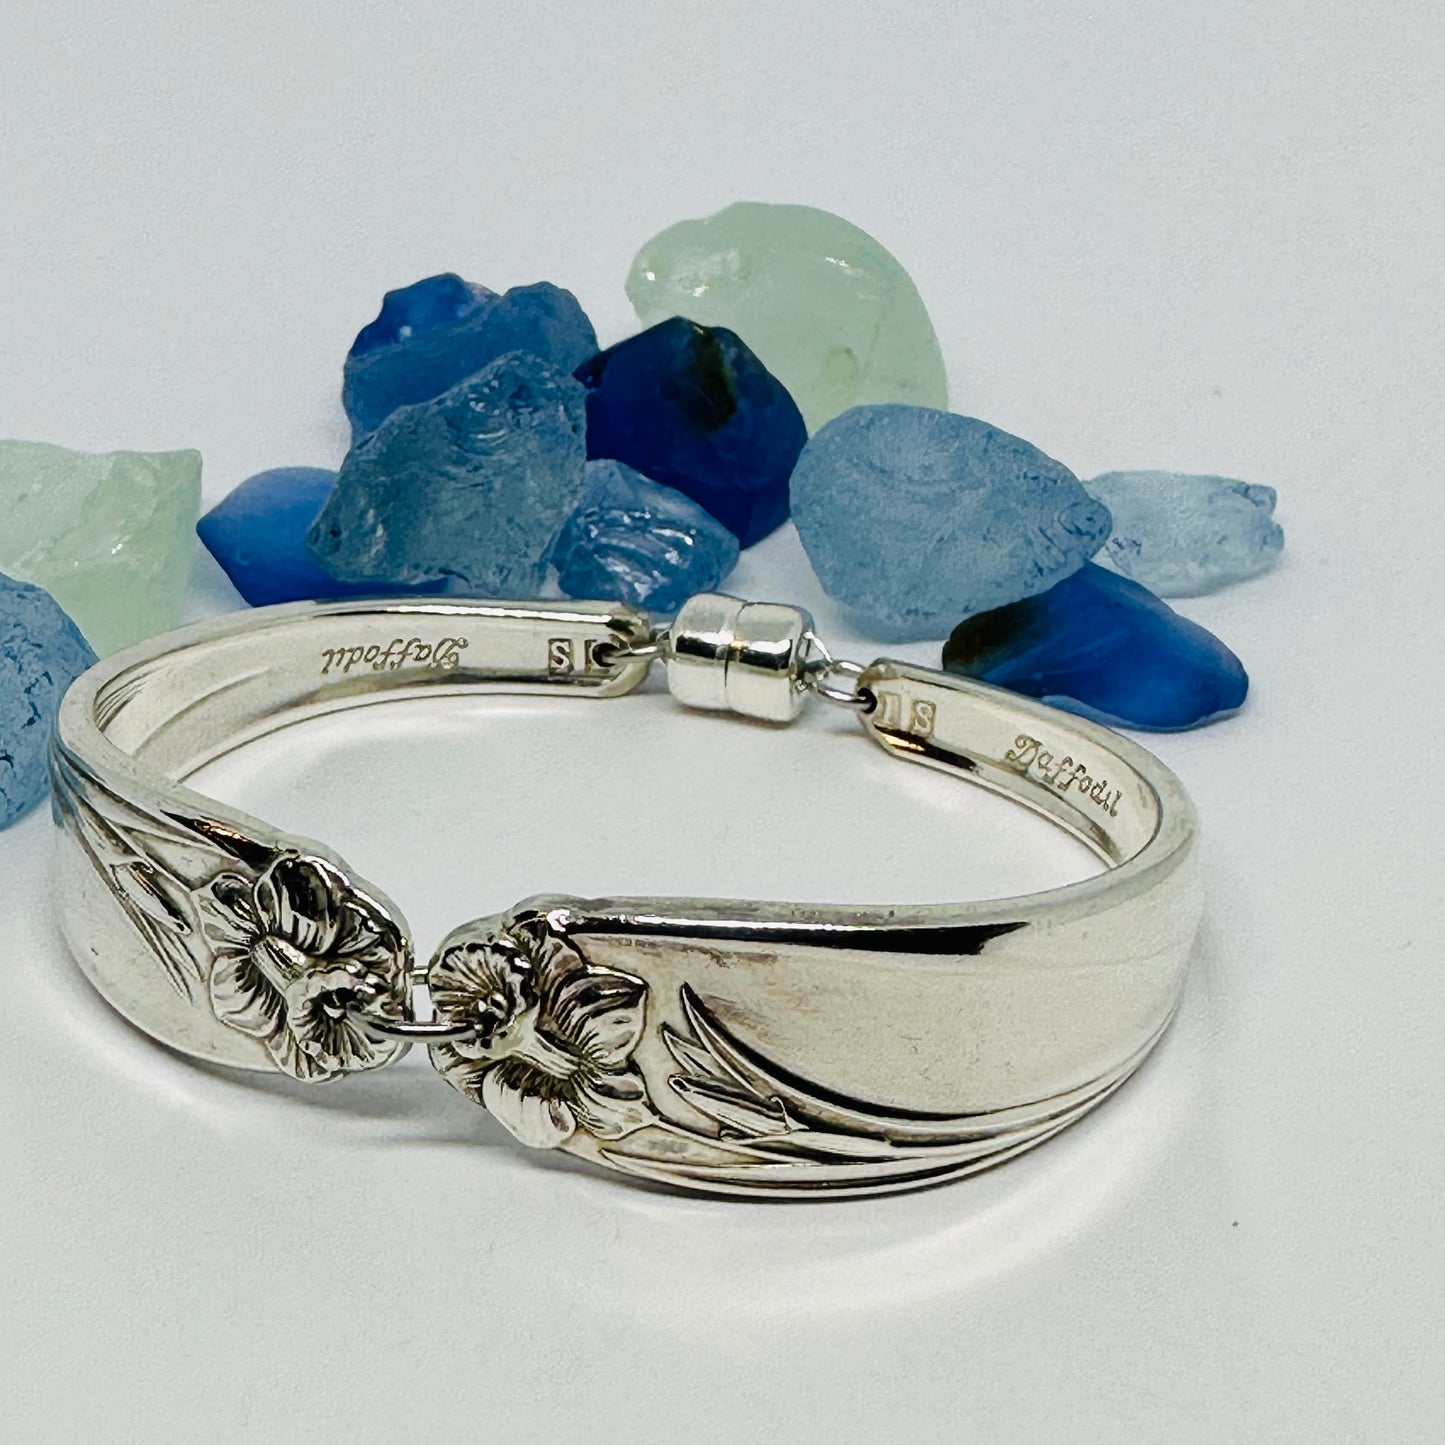 “Daffodil” 1950 Vintage Spoon Bracelet | Silverware | Upcycled | Antique March Birth Flower